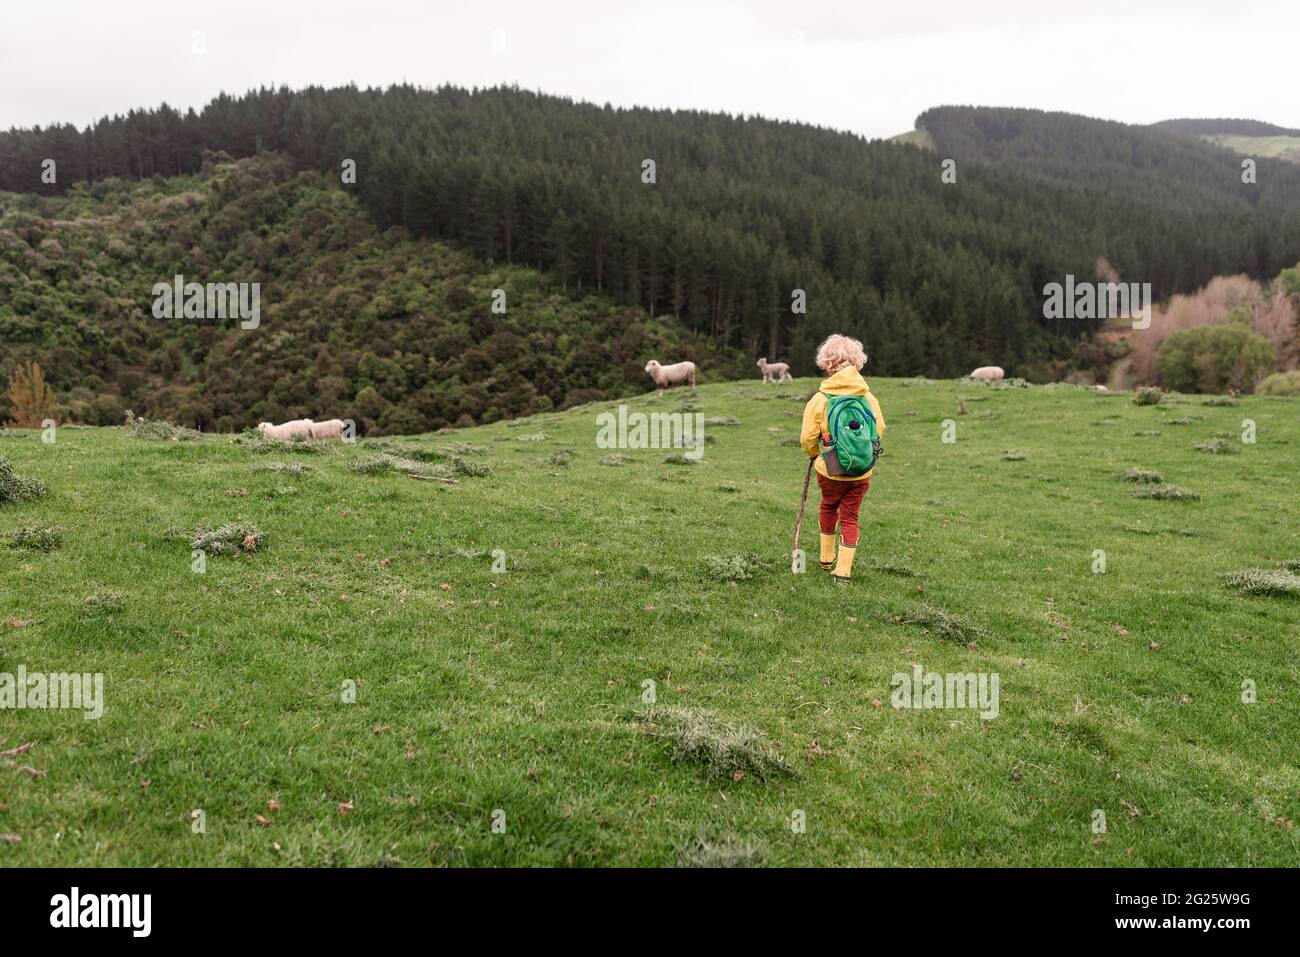 Young child walking in New Zealand field with sheep Stock Photo